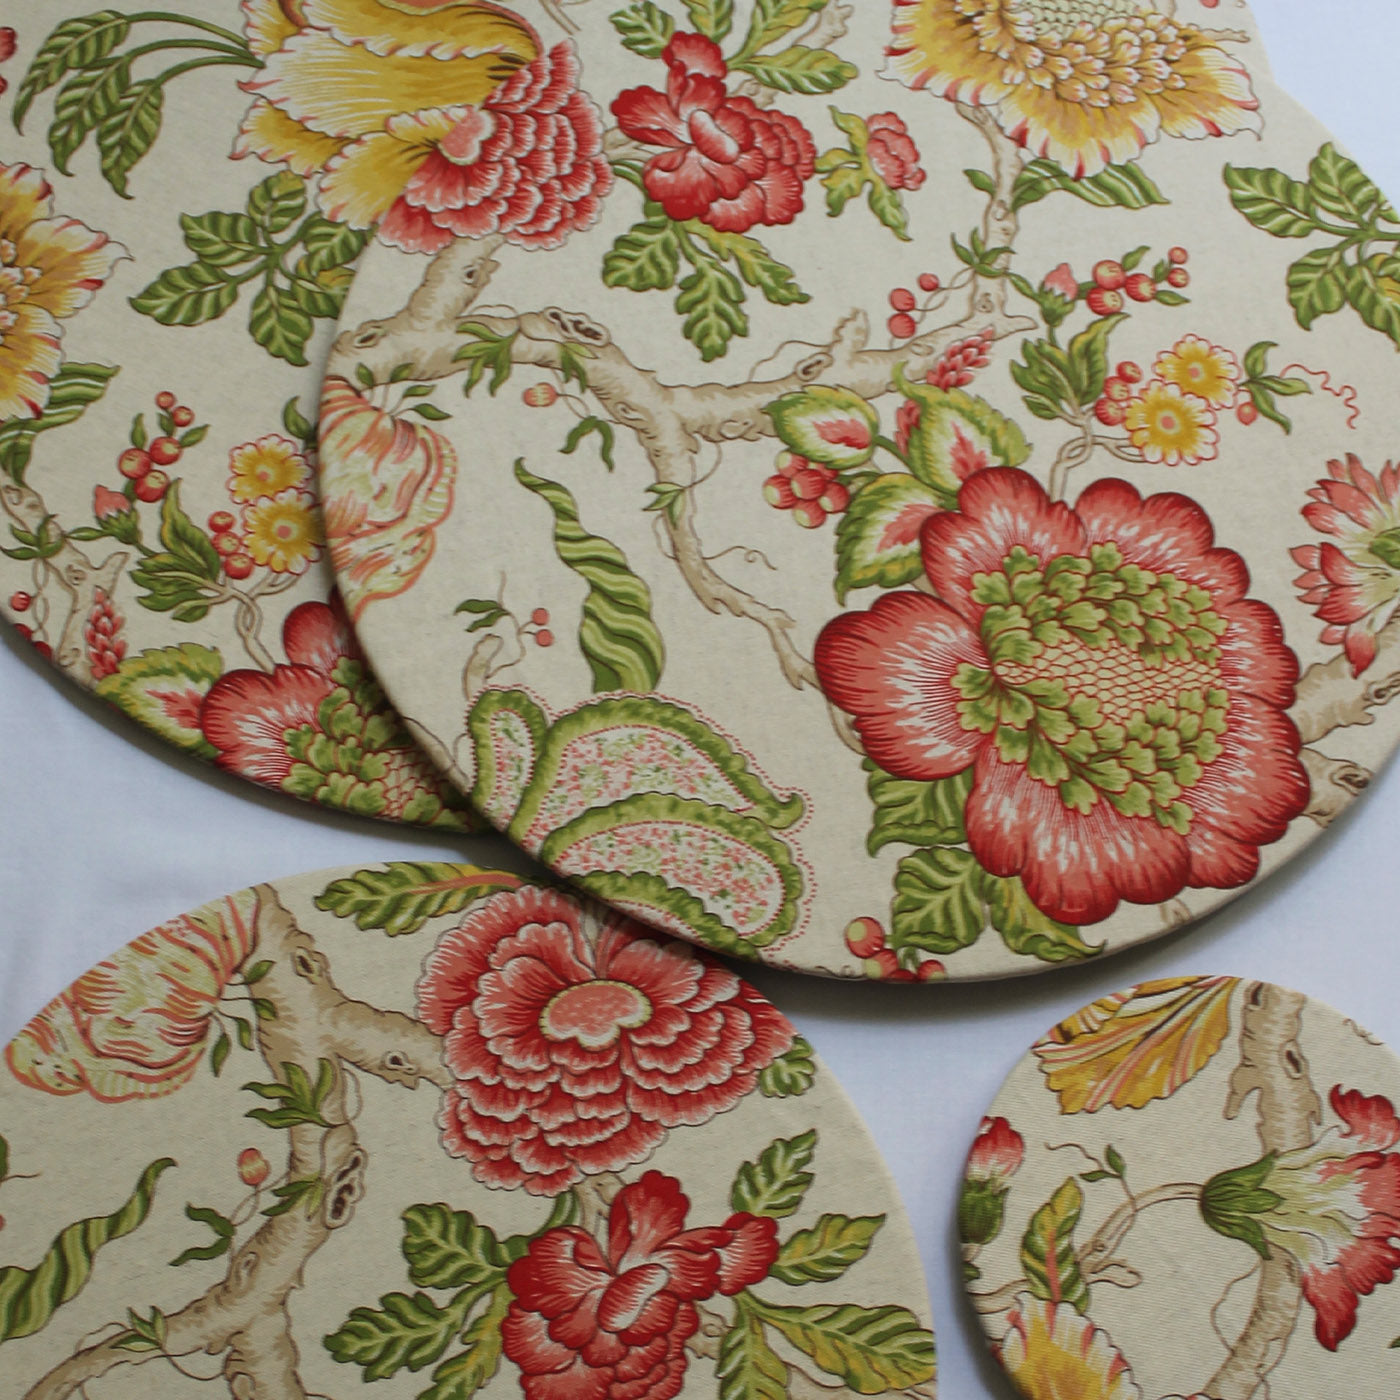 Set of 2 Cuffiette Extra-Small Round Floral Placemats #3 - Alternative view 1